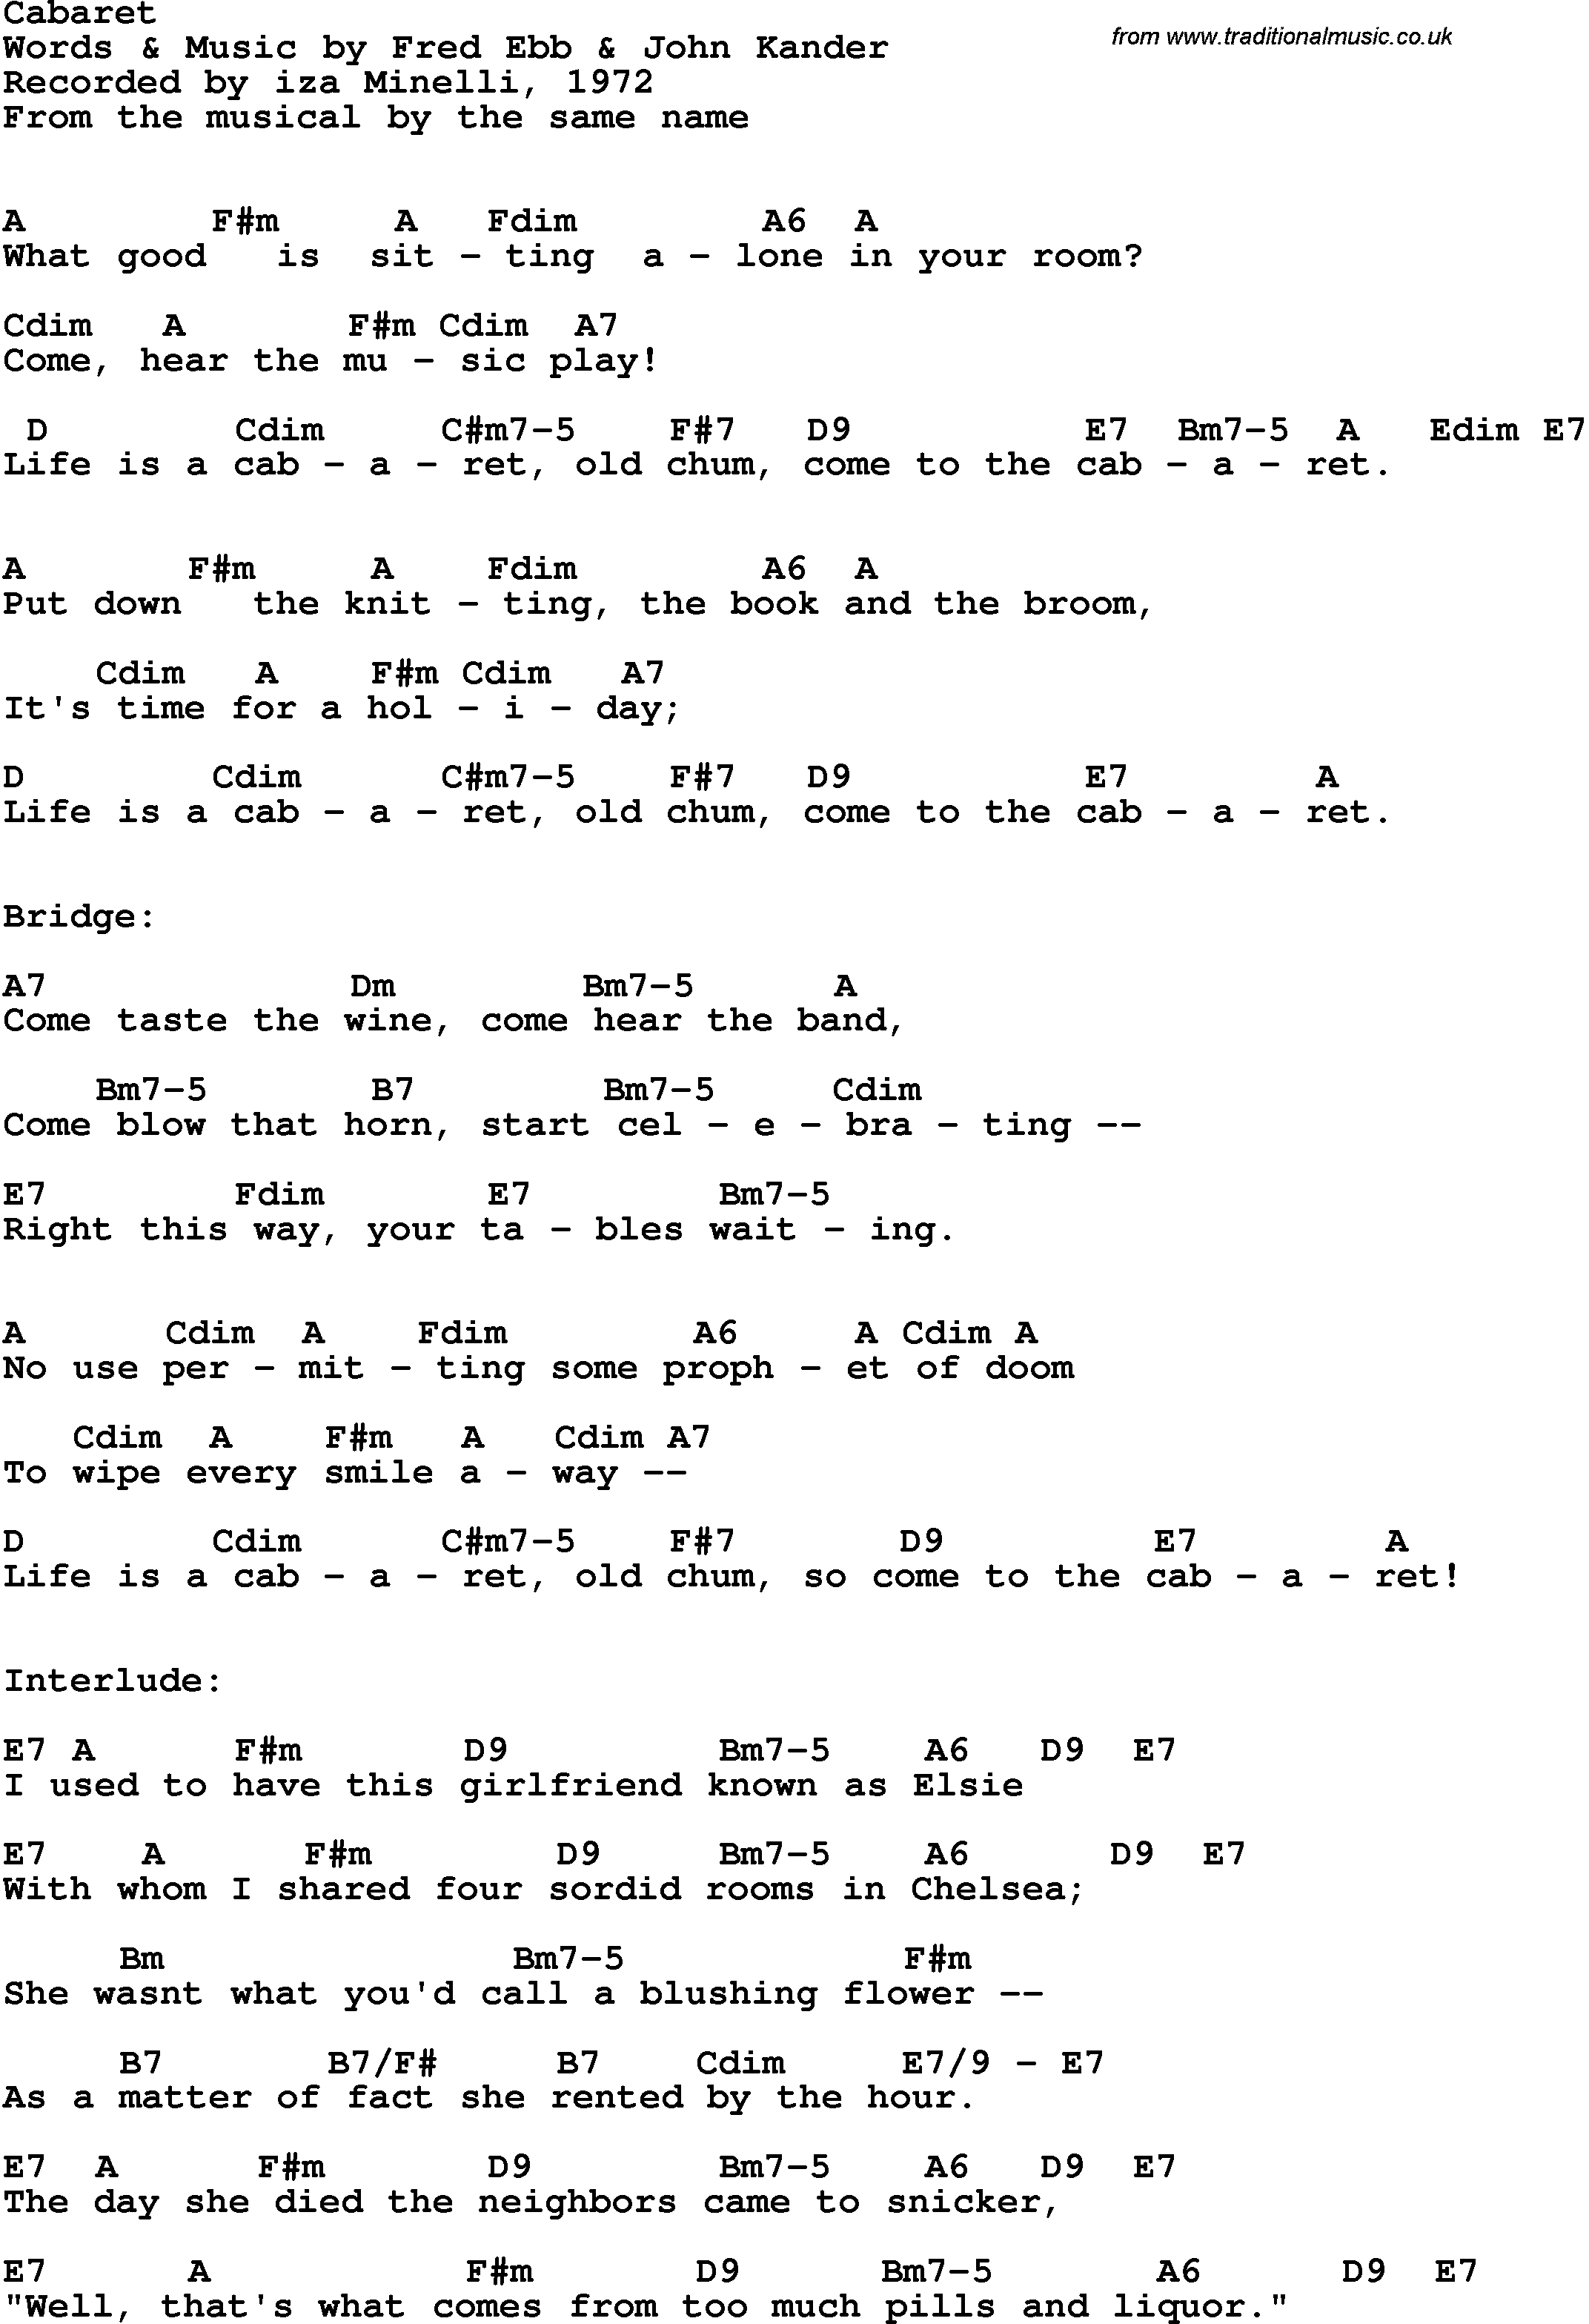 Song Lyrics with guitar chords for Cabaret - Liza Minelli, 1972